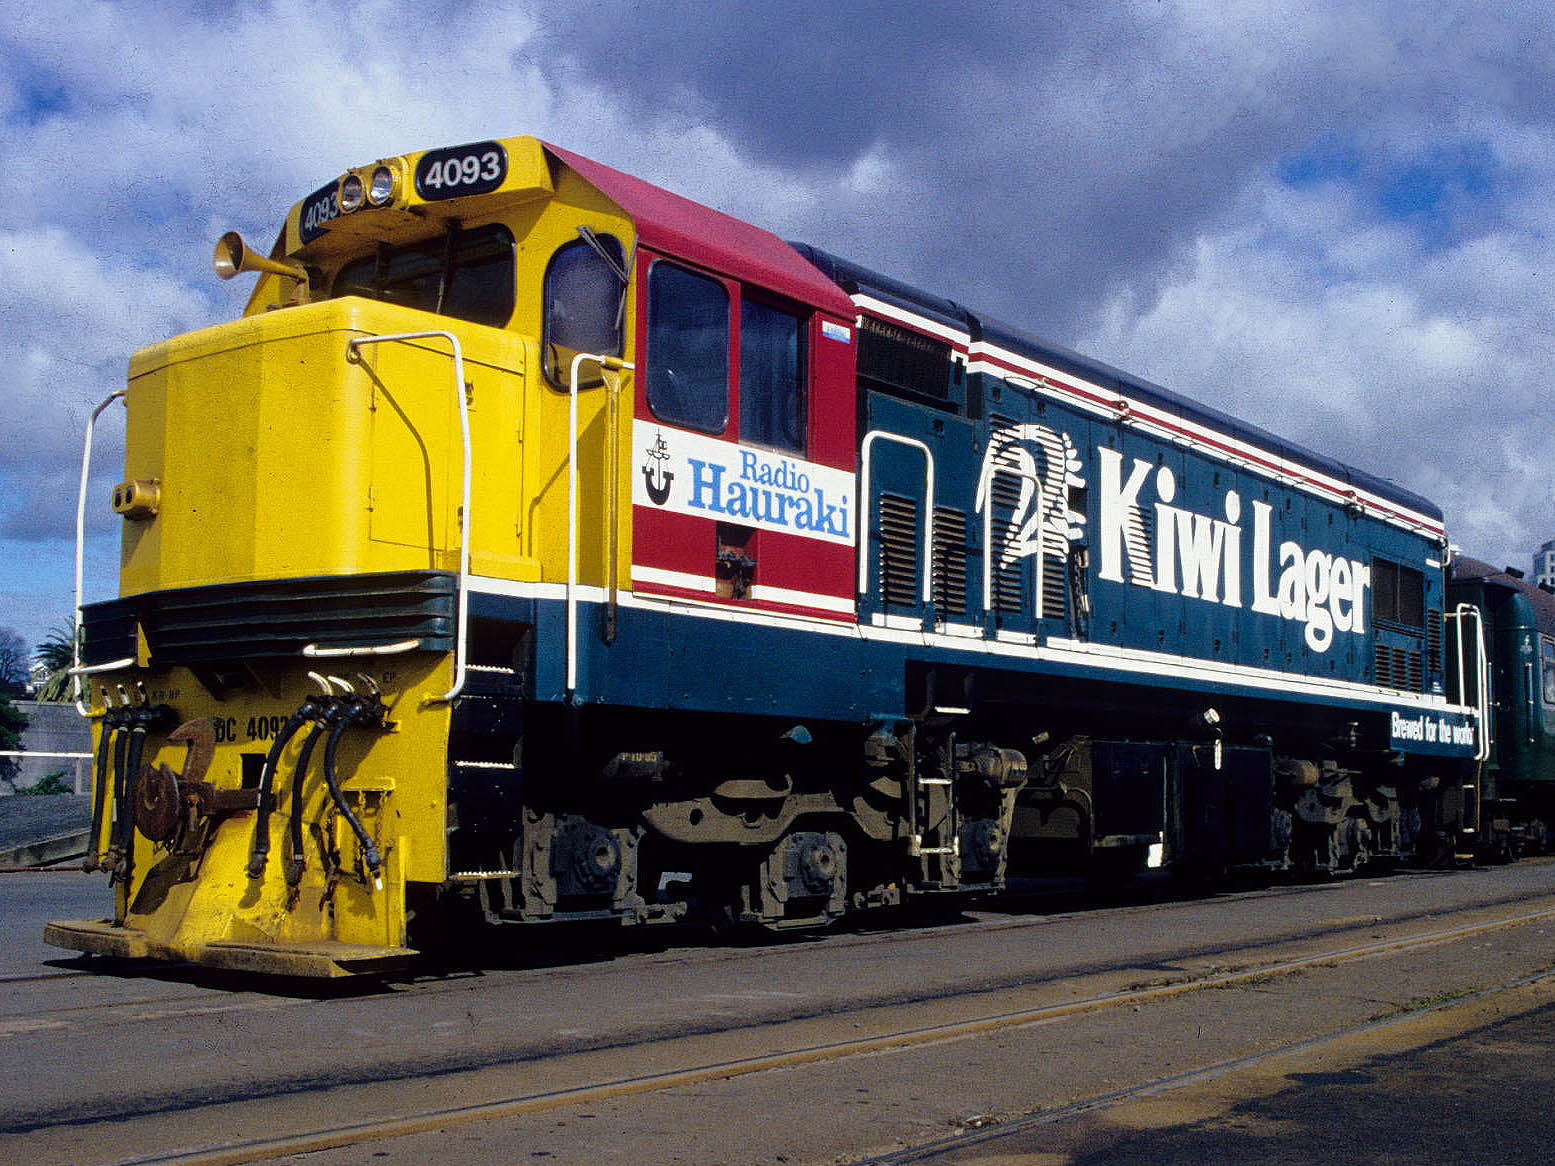 DC 4093 in Kiwi Lager livery